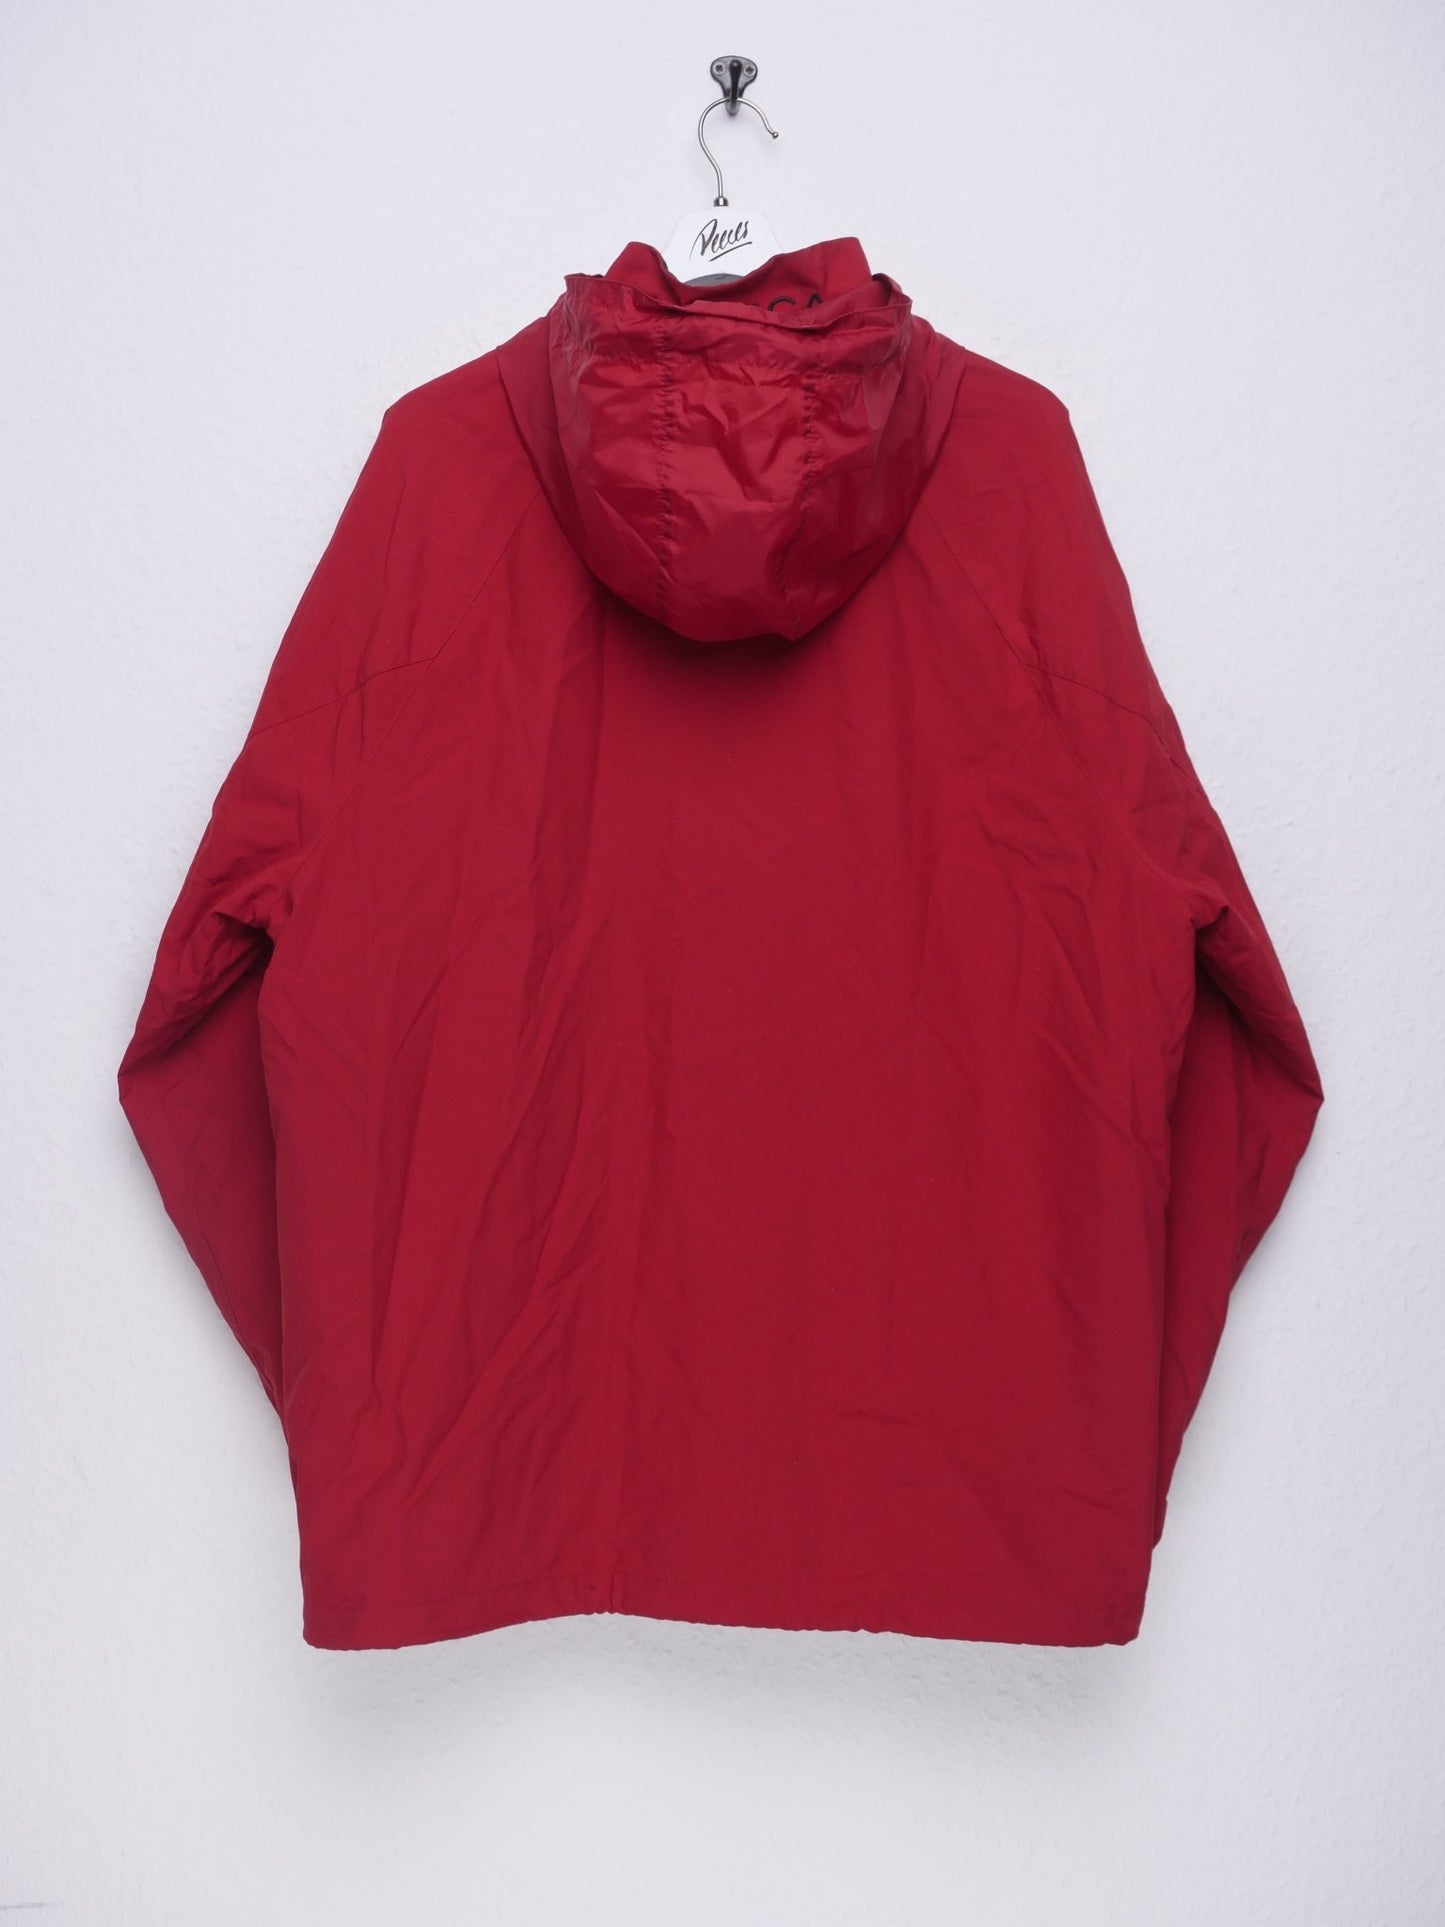 nautica patched Logo red Track Jacket - Peeces